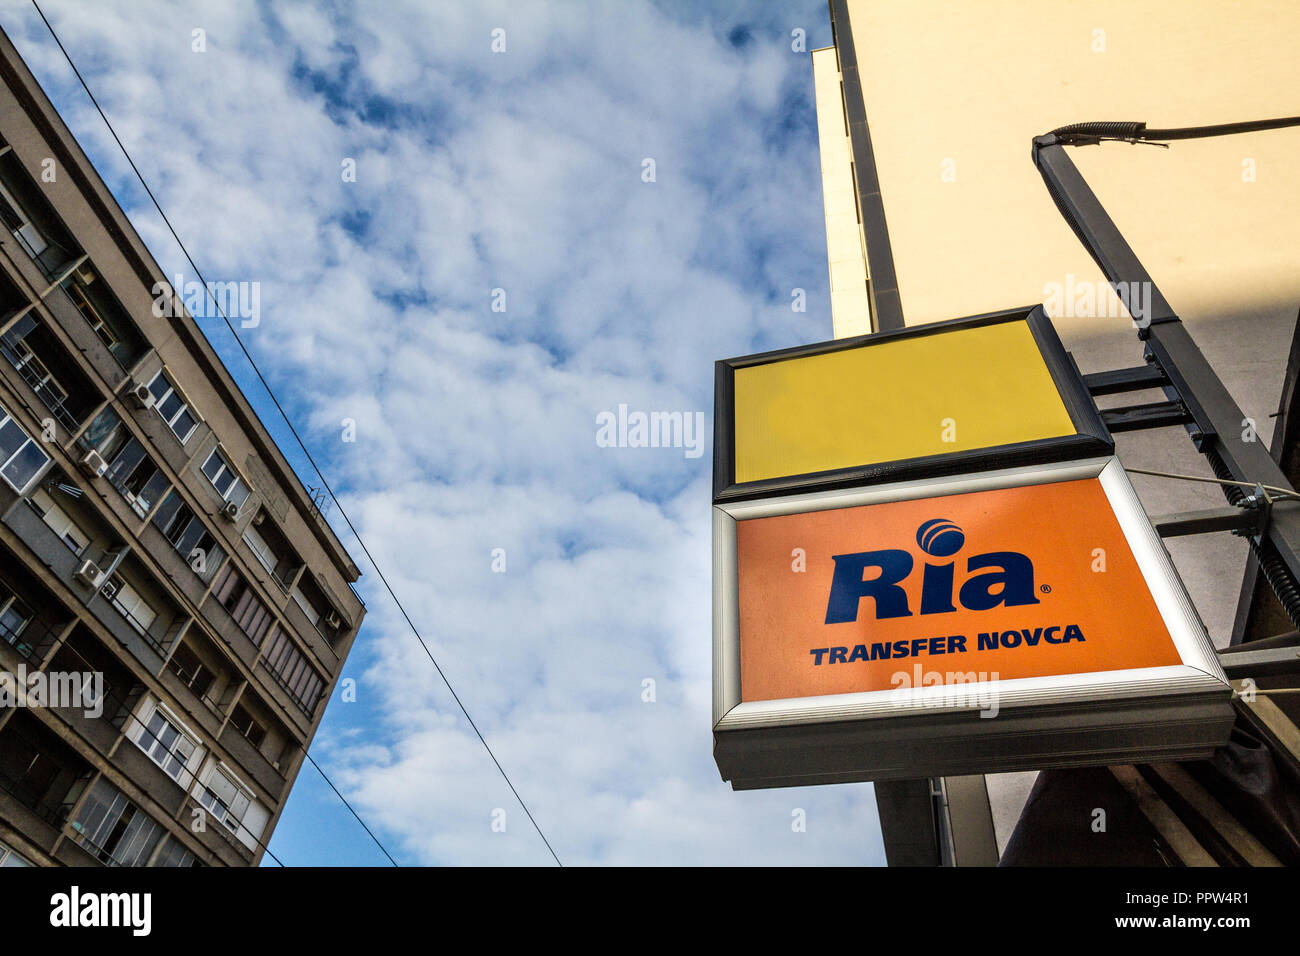 BELGRADE, SERBIA - SEPTEMBER 27, 2018: Ria logo on their main exchange office for Belgrade. Ria is an American financial services company specialized  Stock Photo